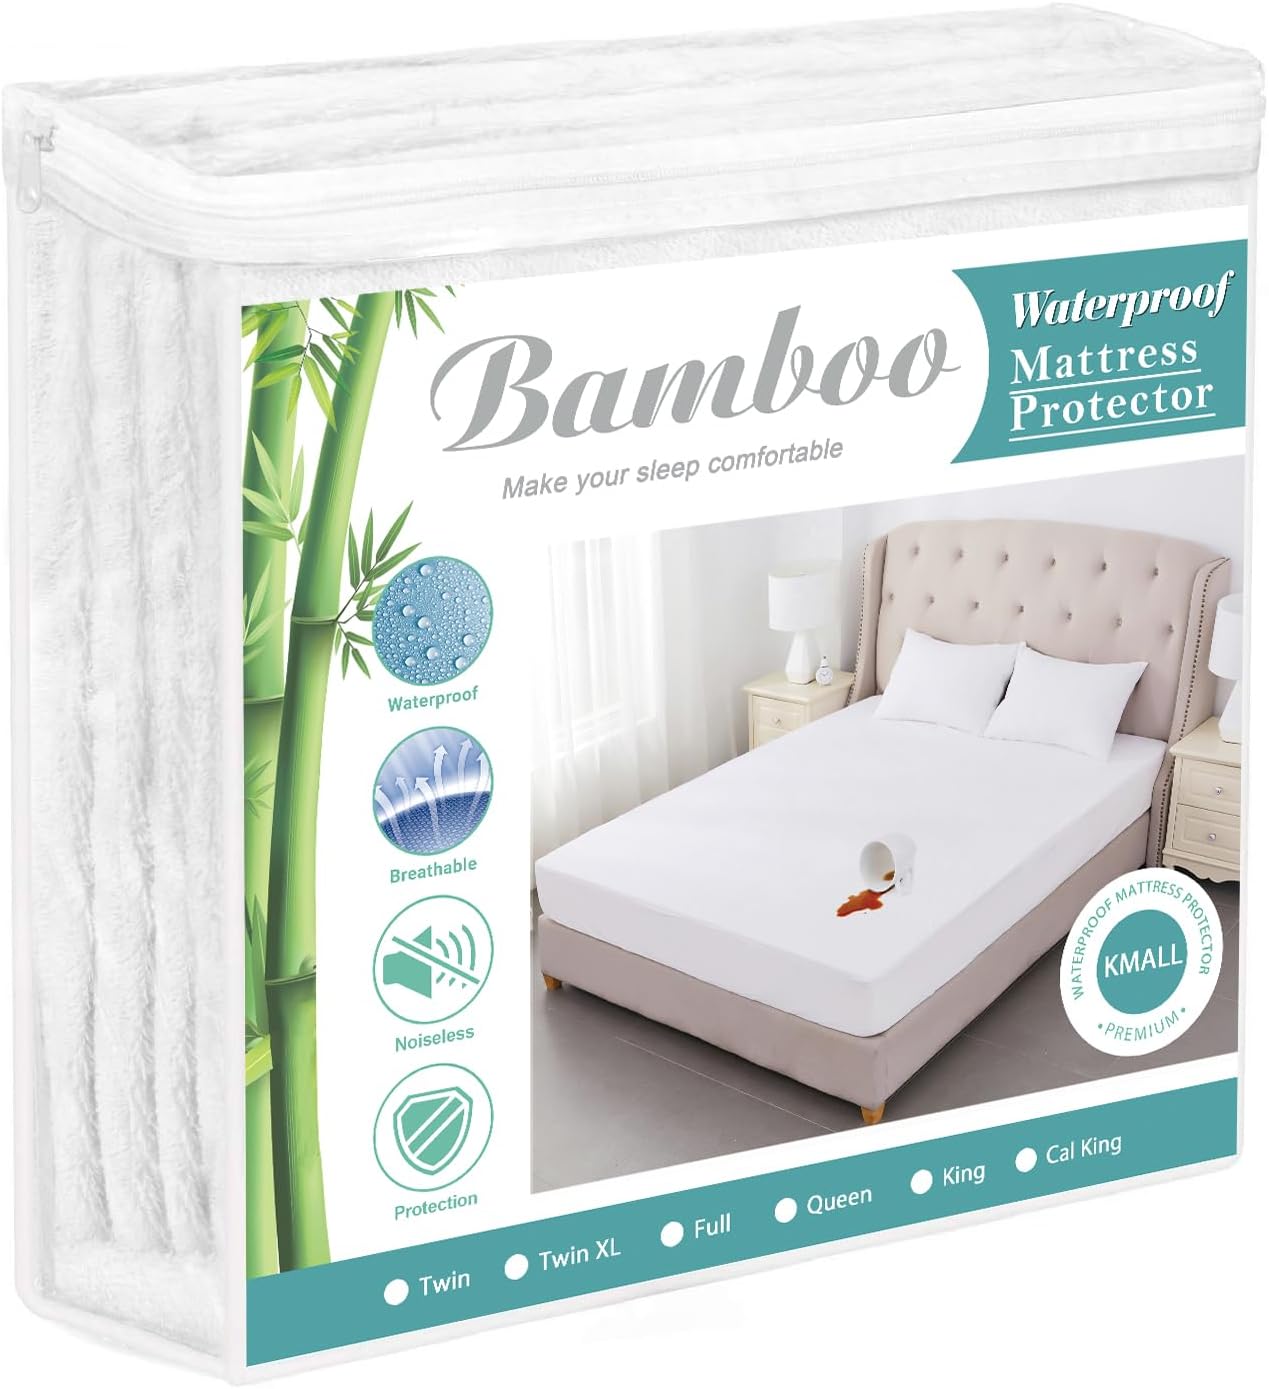 This King Size Cooling Waterproof Mattress Protector is like the superhero of my bed! It' so amazing; it' practically the Batman of bedding accessories. I mean, it' waterproof, so it' like having a forcefield against spills and accidents. My bed has turned into a fortress, impervious to all liquids! And the bamboo terry top It' like the red carpet for my sleep! It' so comfy; I'm half expecting it to ask for my autograph. Plus, it' noiseless, so I can wrestle with my arch-nemesis, Mrs. 